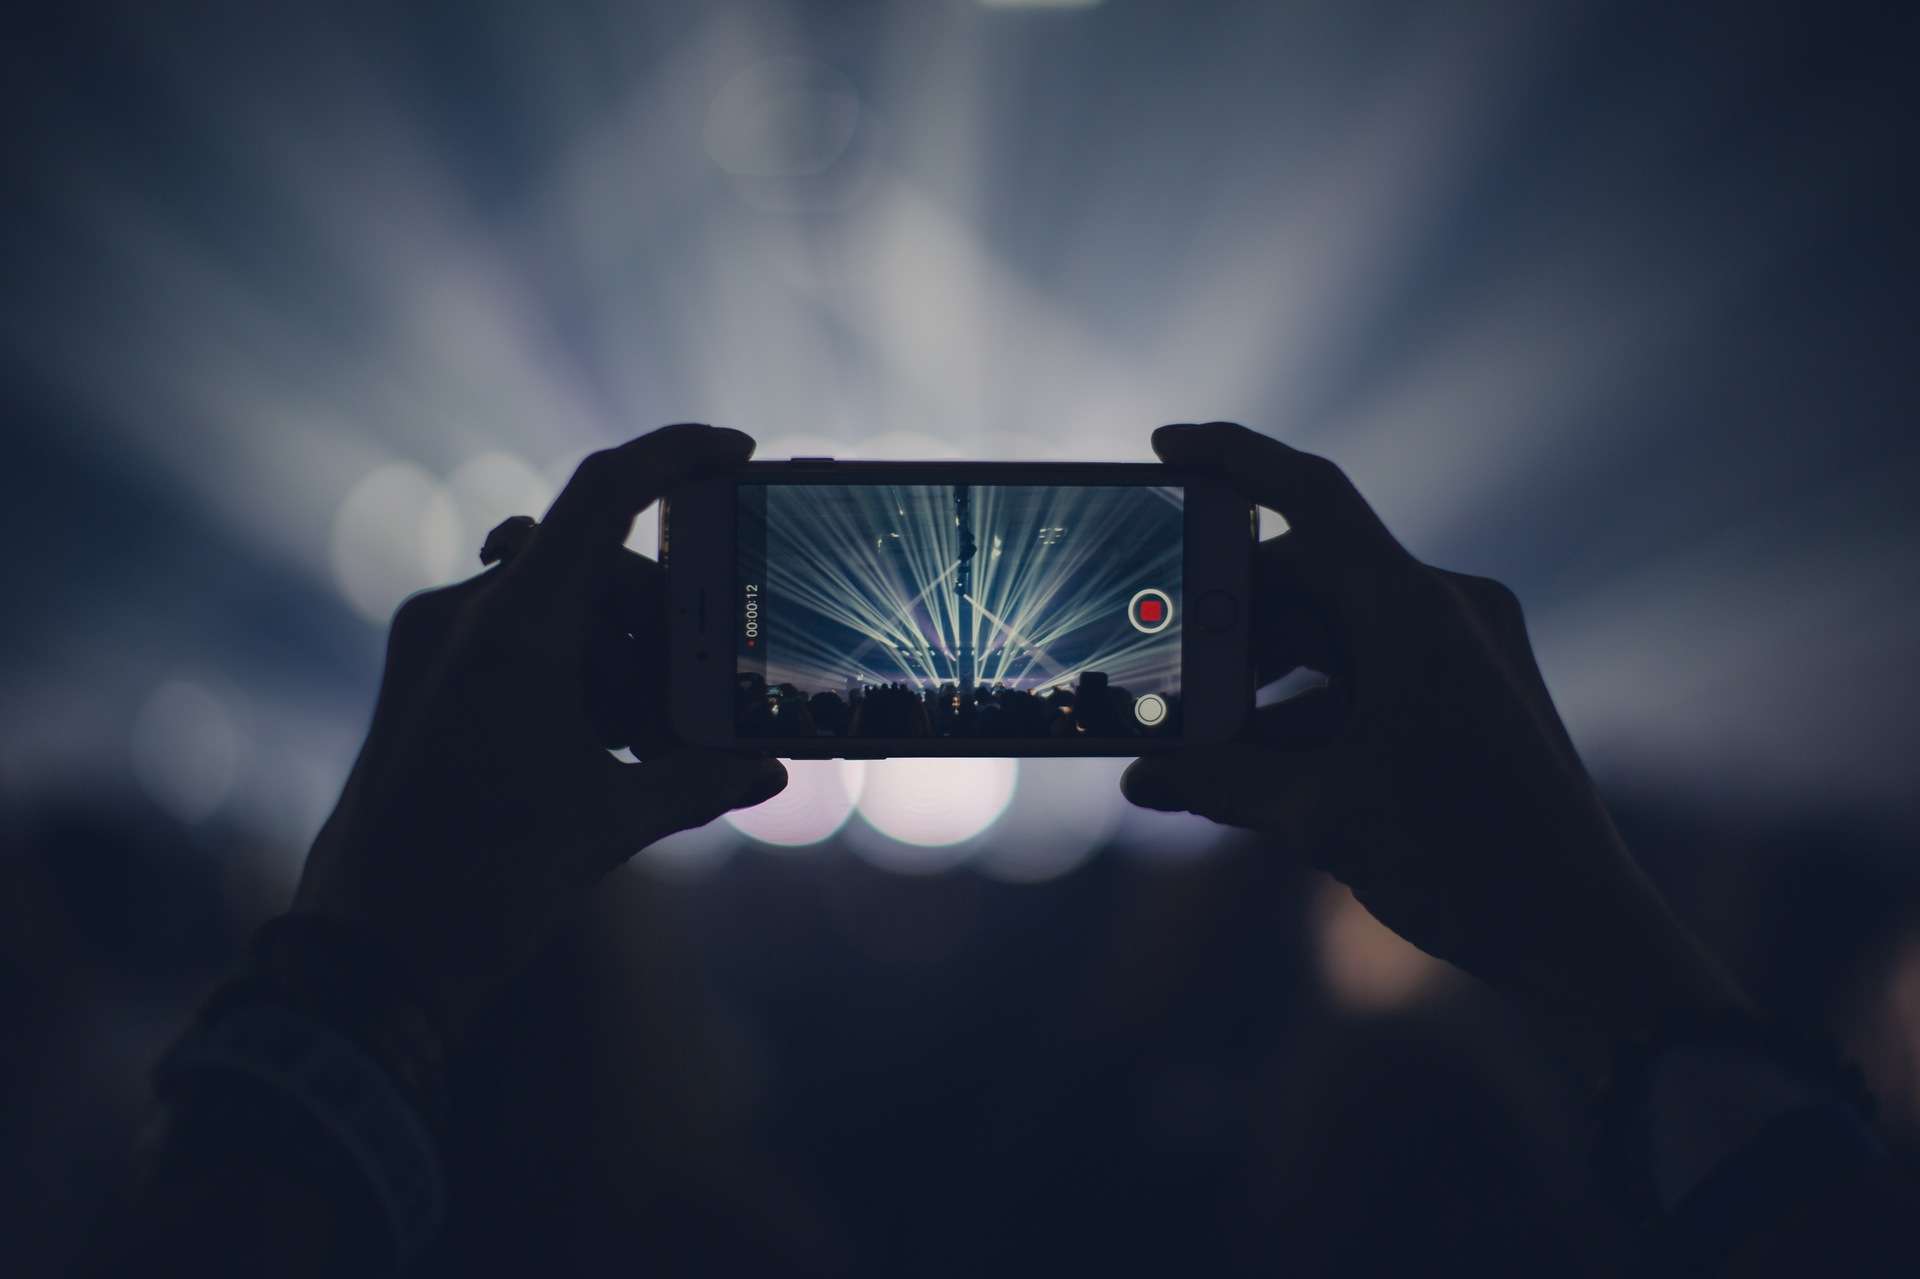 Concert photography could soon be banned.